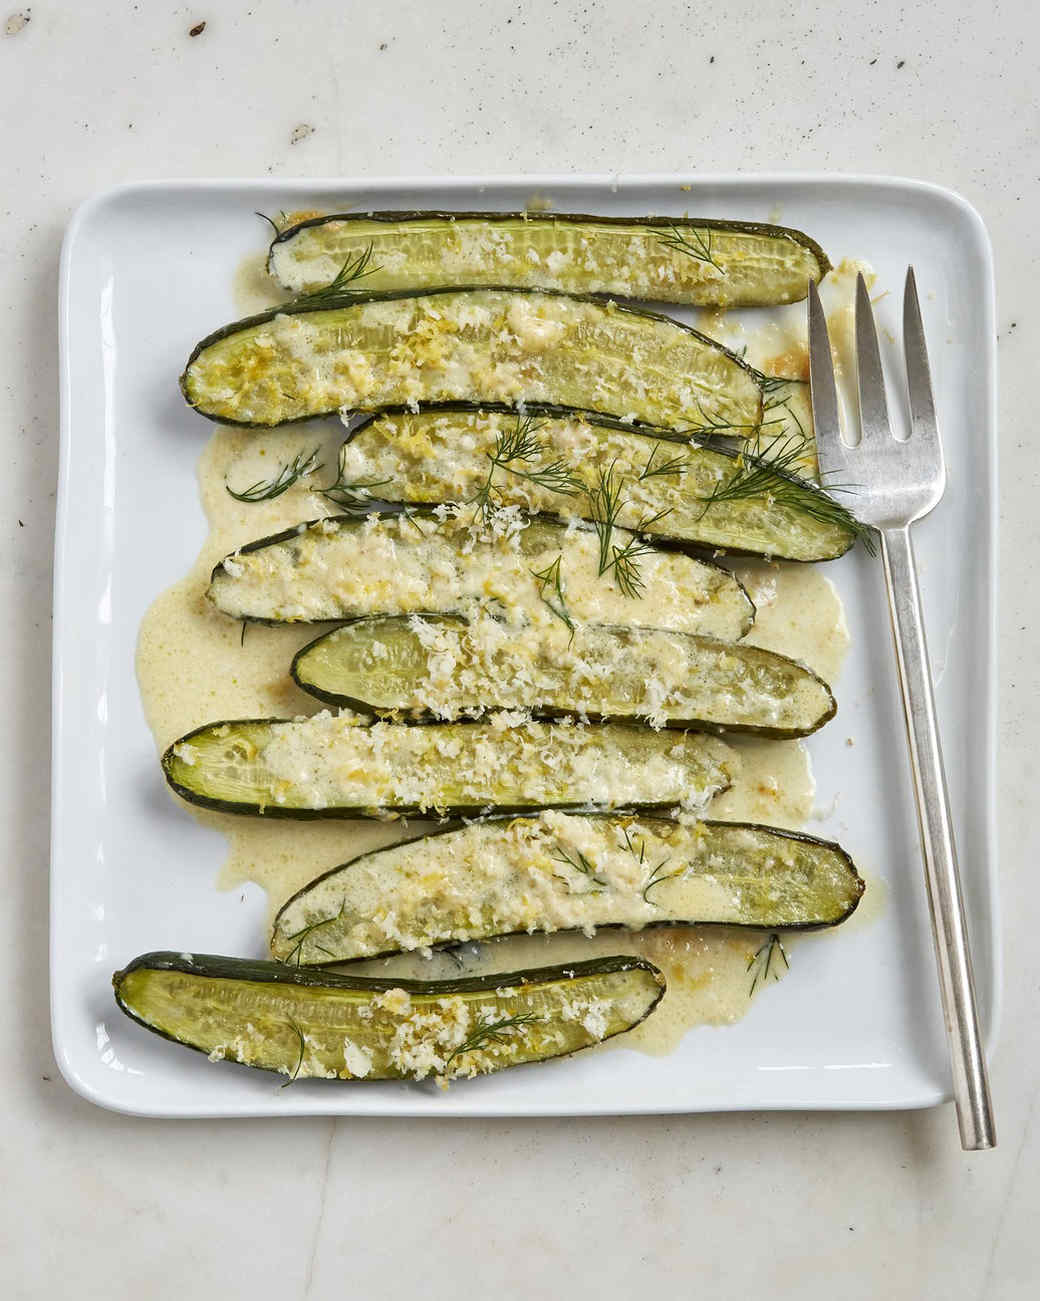 Roasted Cucumbers With Cream and Horseradish - Dinner recipe for tonight